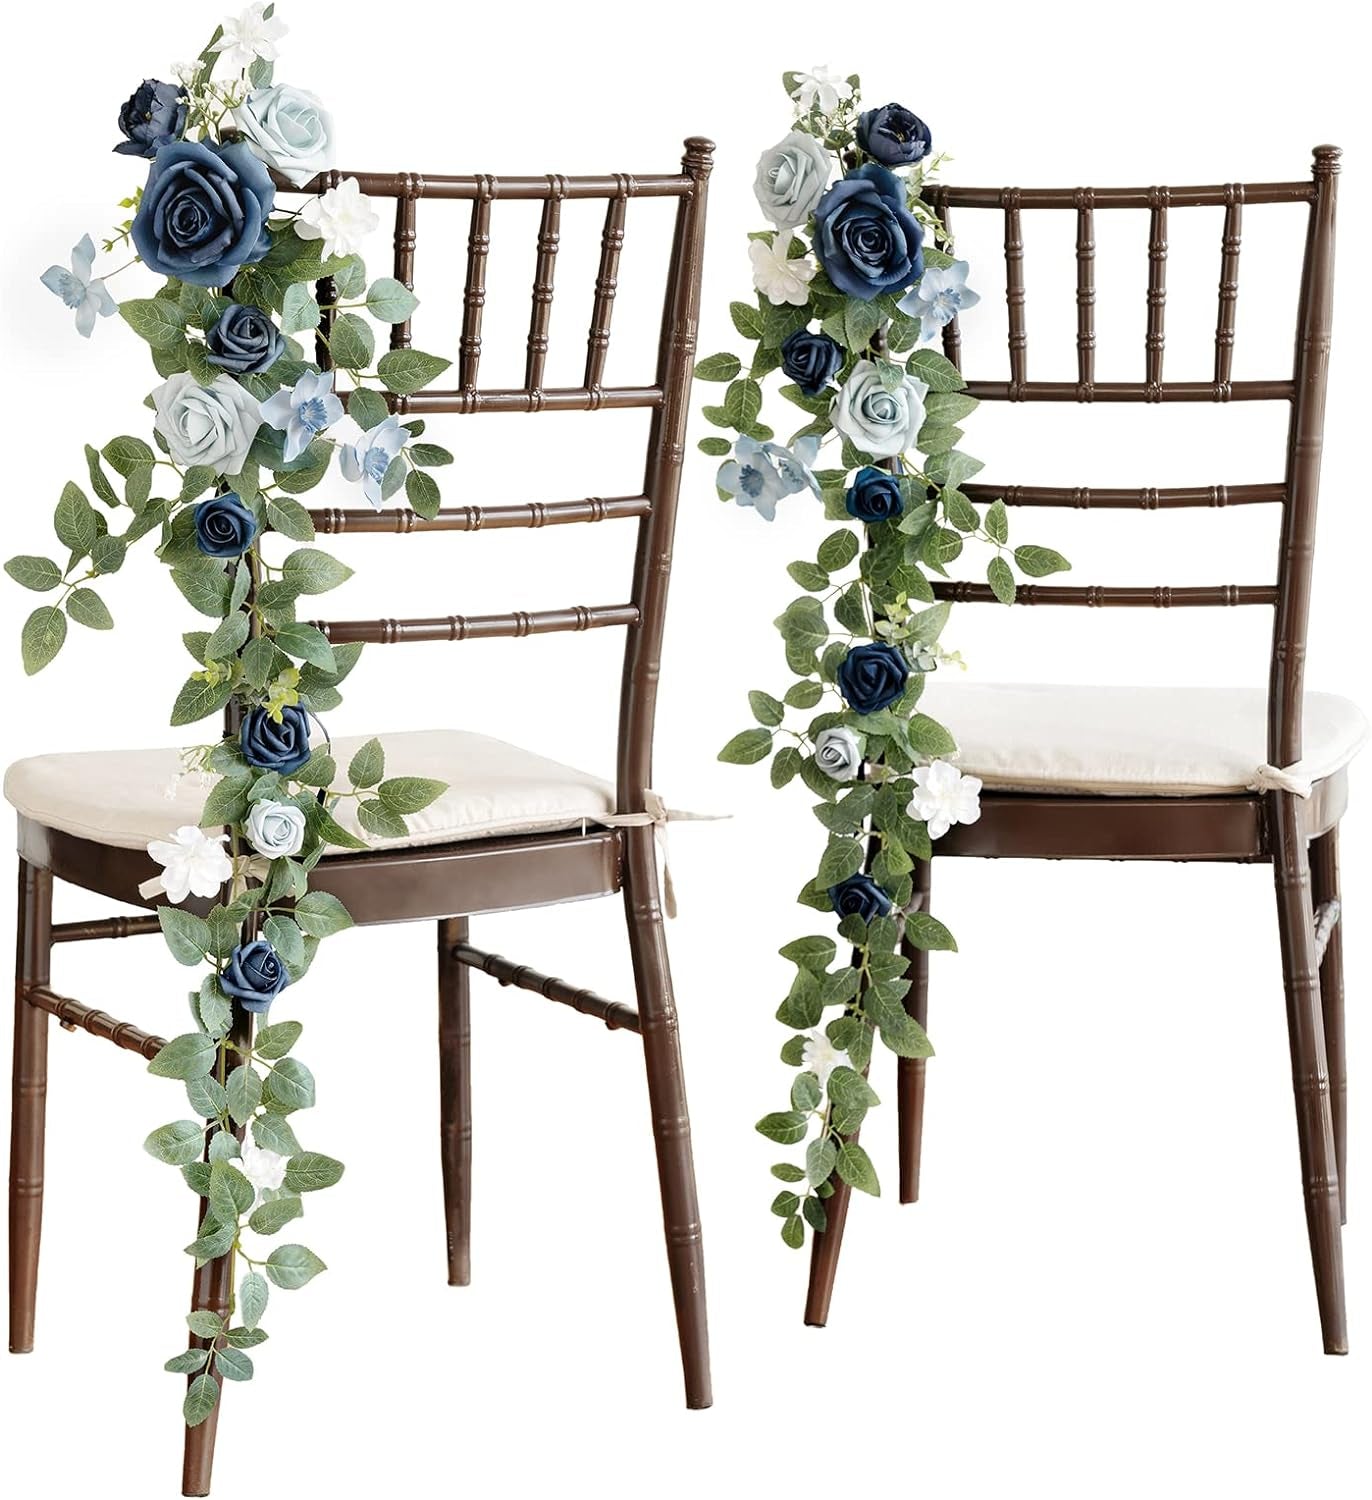 Ling'S Moment 10Pcs Wedding Chair Decorations Aisle Floral Swag Artificial Pew Flowers Hanging Garland White & Sage Green for Ceremony Reception Church Rose Floral Faux Arrangement Party Outdoor Decor